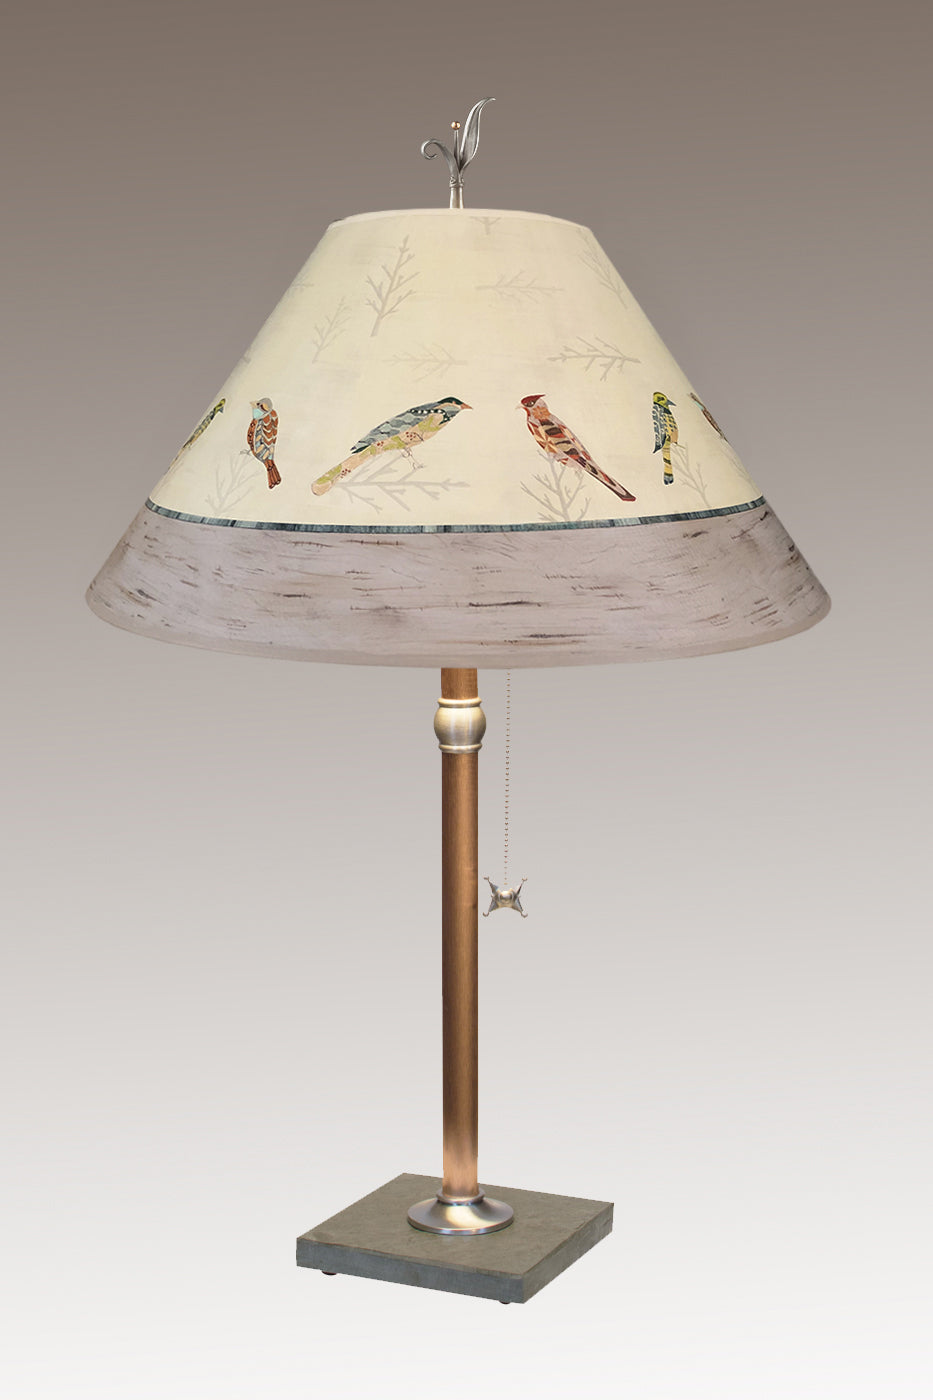 Janna Ugone &amp; Co Table Lamps Copper Table Lamp with Large Conical Shade in Bird Friends